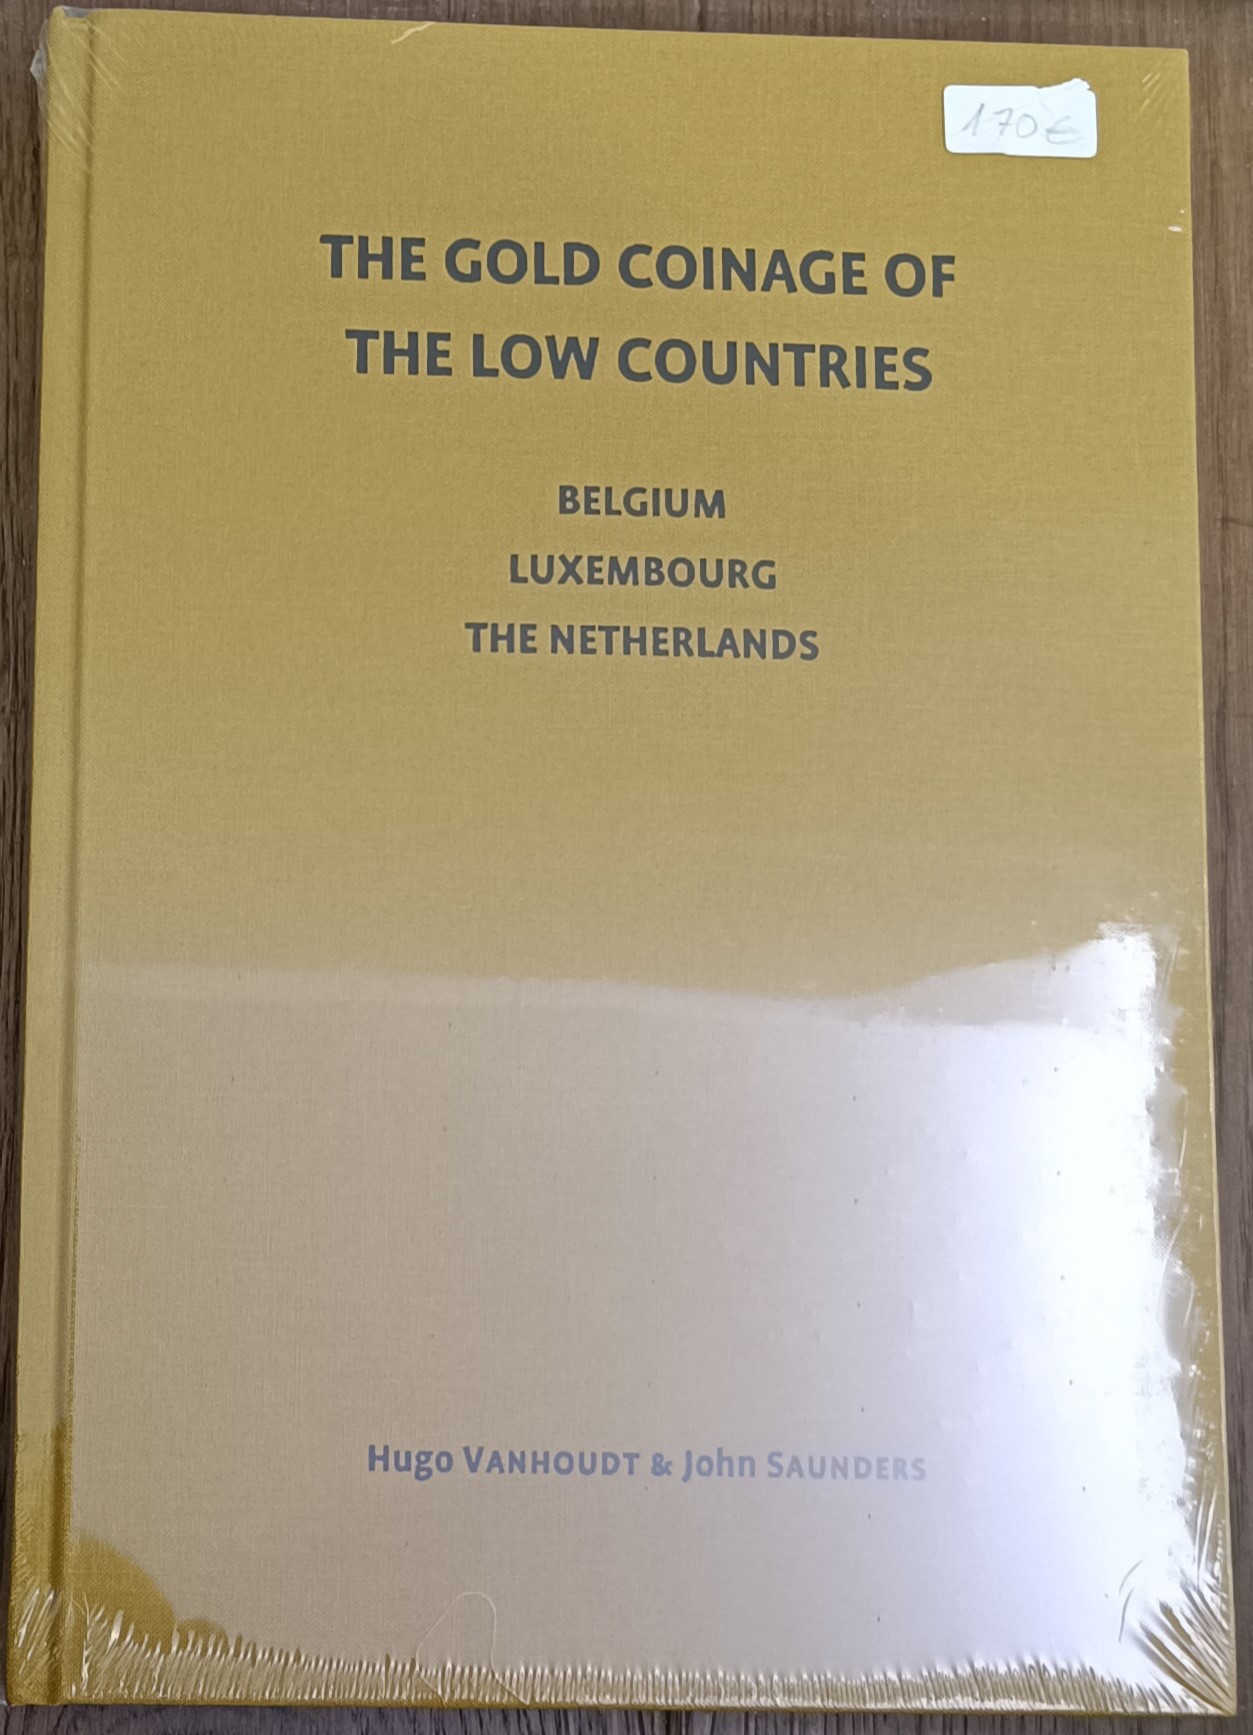 The gold coinage of the low countries: Belgium, Luxembourg, The Netherlands